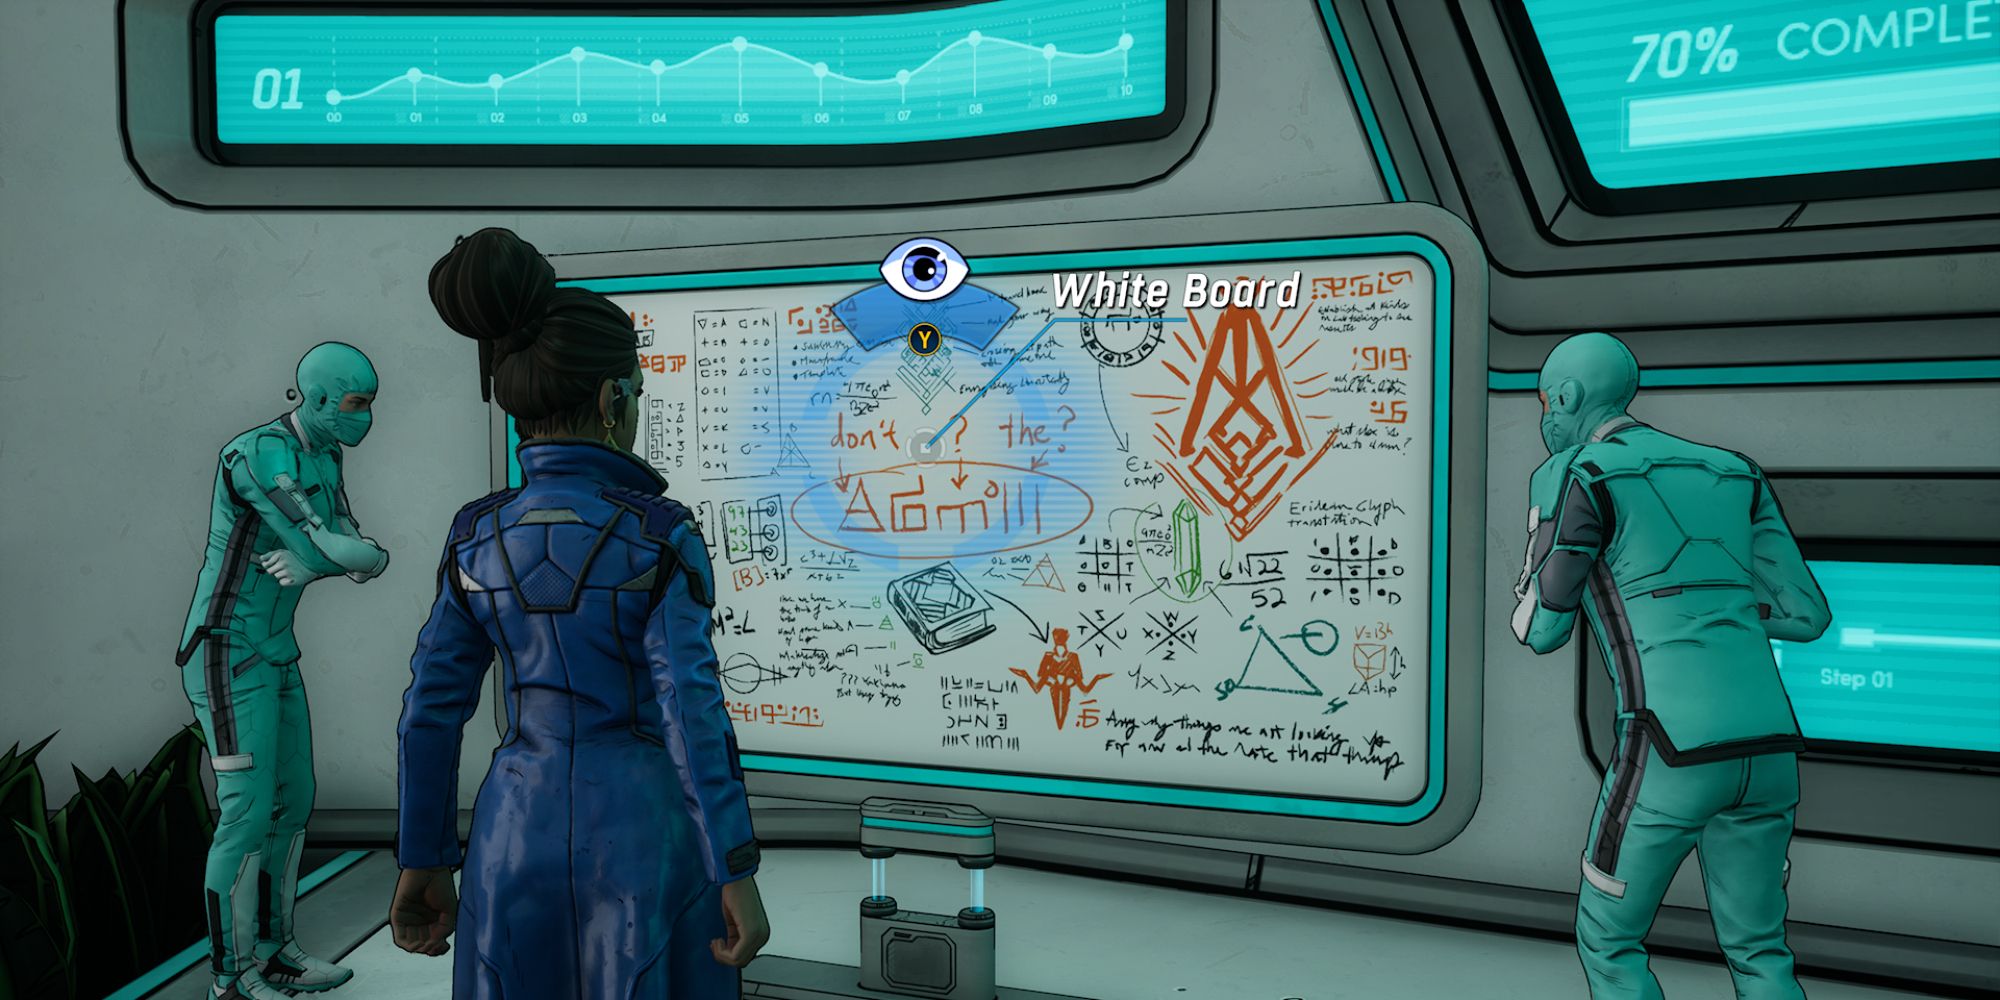 New Tales From The Borderlands Screenshot Of White Board